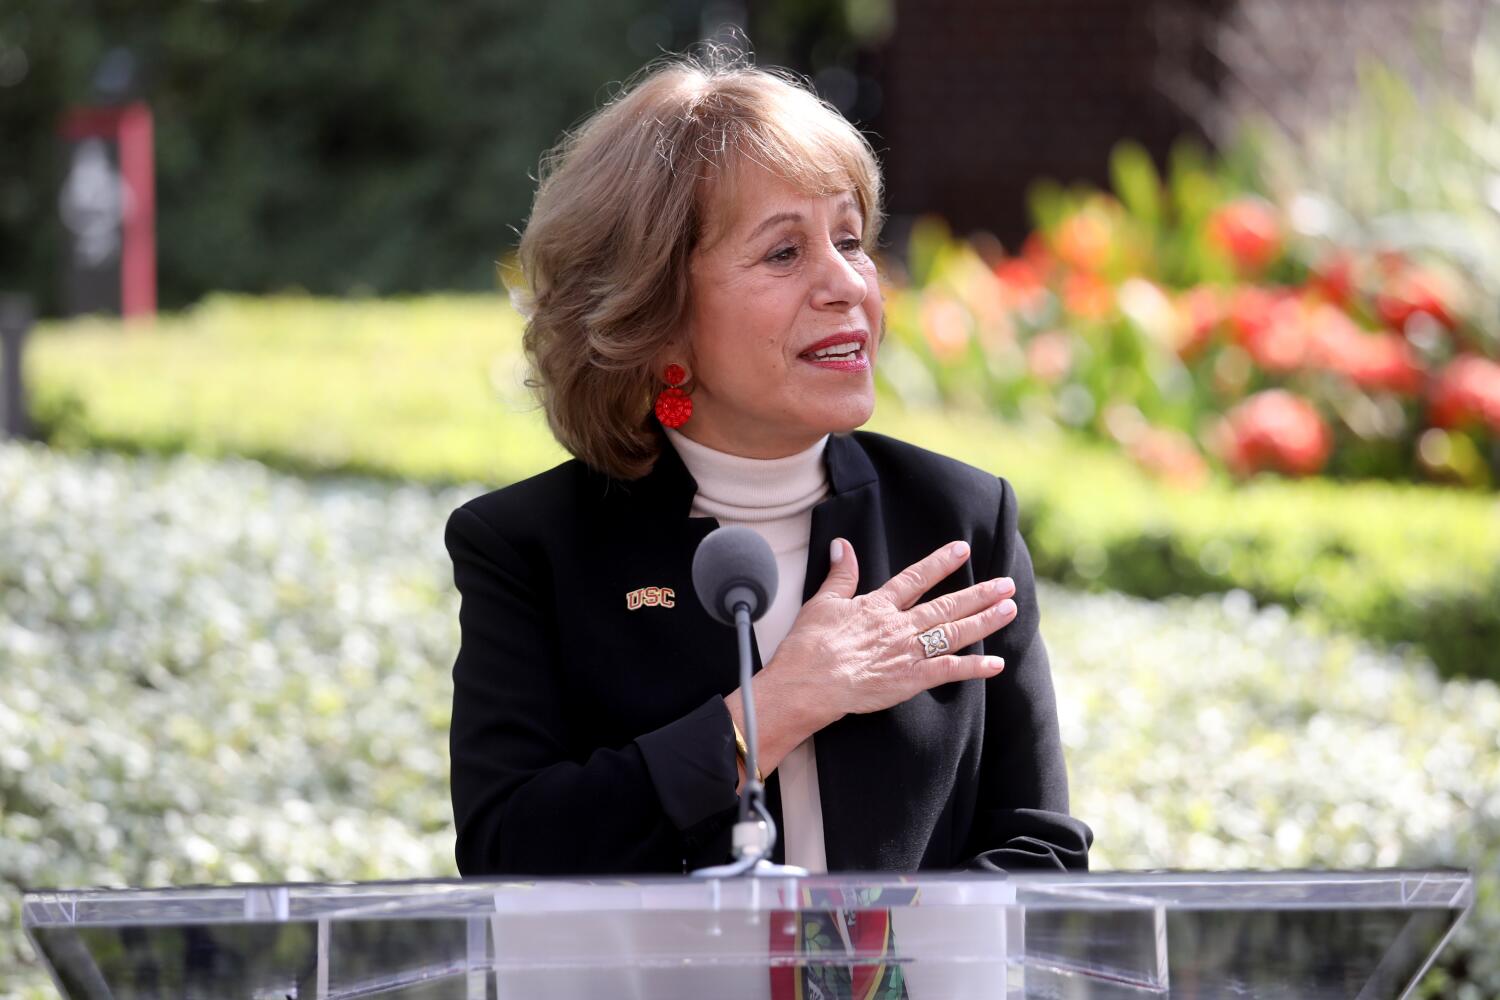 usc’s-faculty-senate-censures-president-carol-folt-and-provost-over-commencement